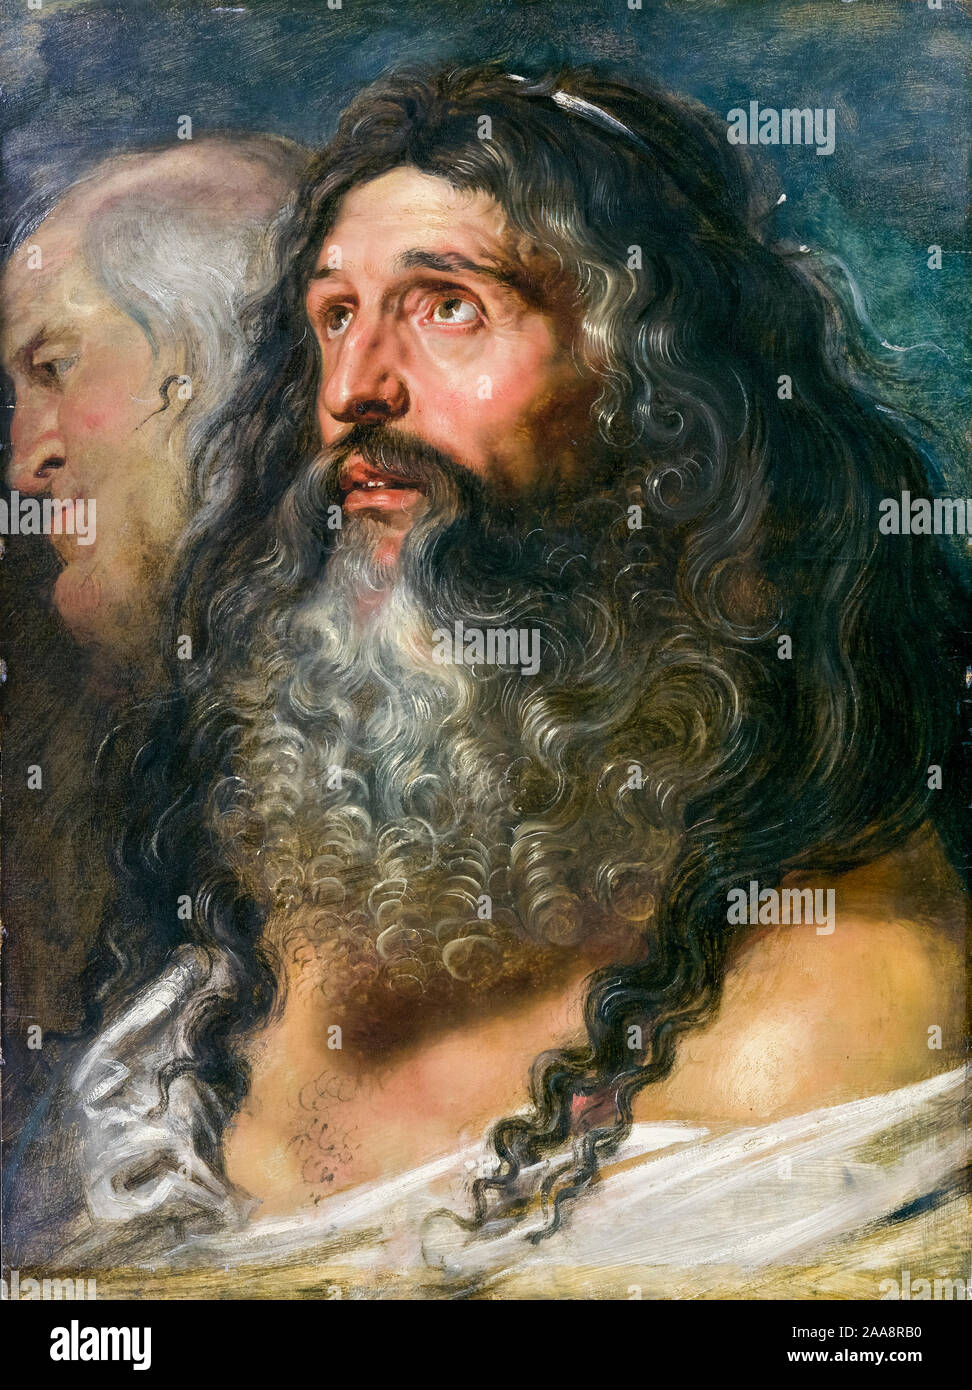 Peter Paul Rubens, Study of Two Heads, portrait painting, 1609 Stock Photo